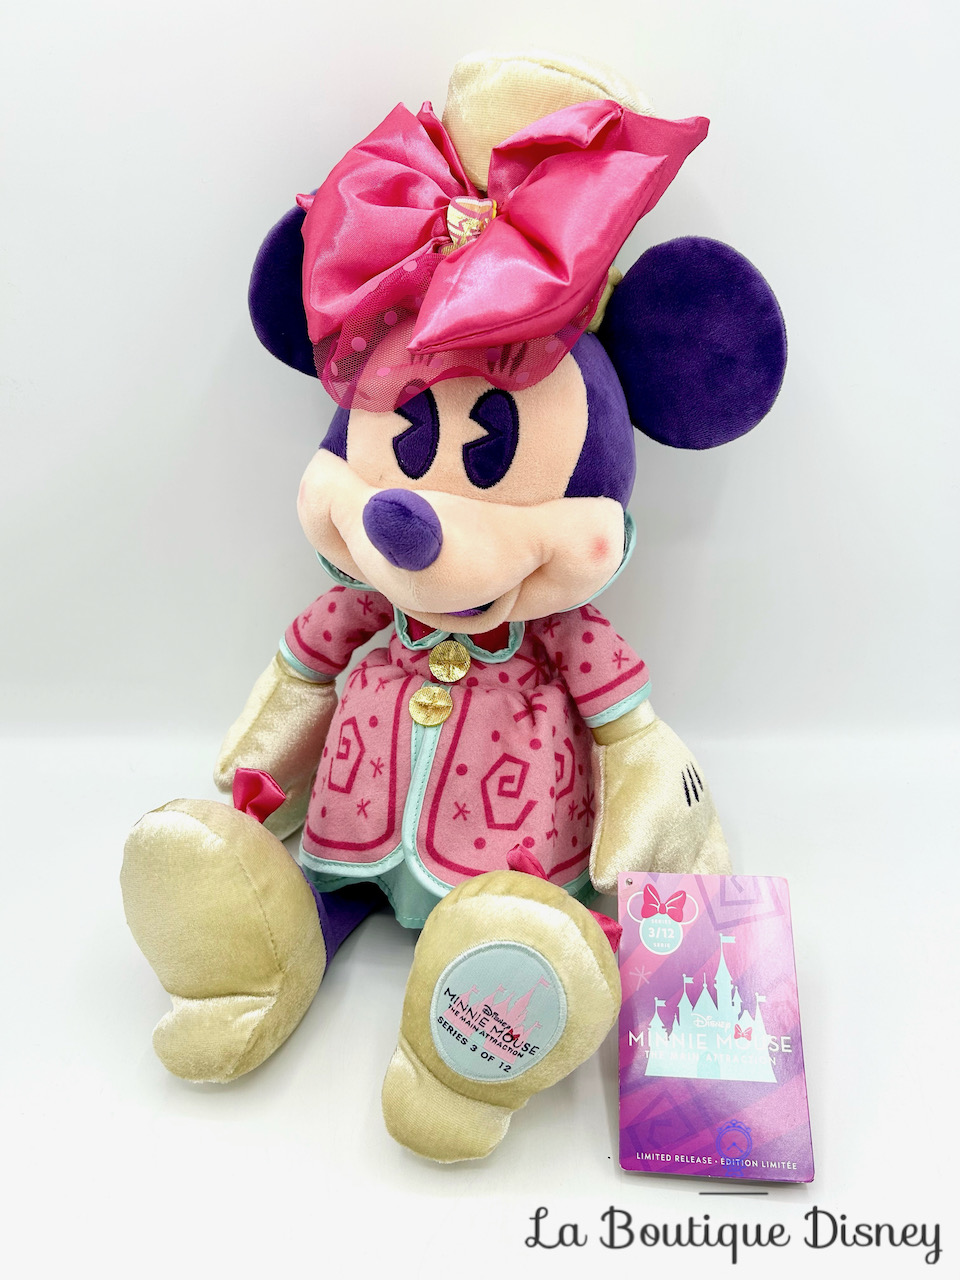 peluche-minnie-mouse-main-attraction-3-12-mad-tea-party-alice-disney-store-édition-limitée-1